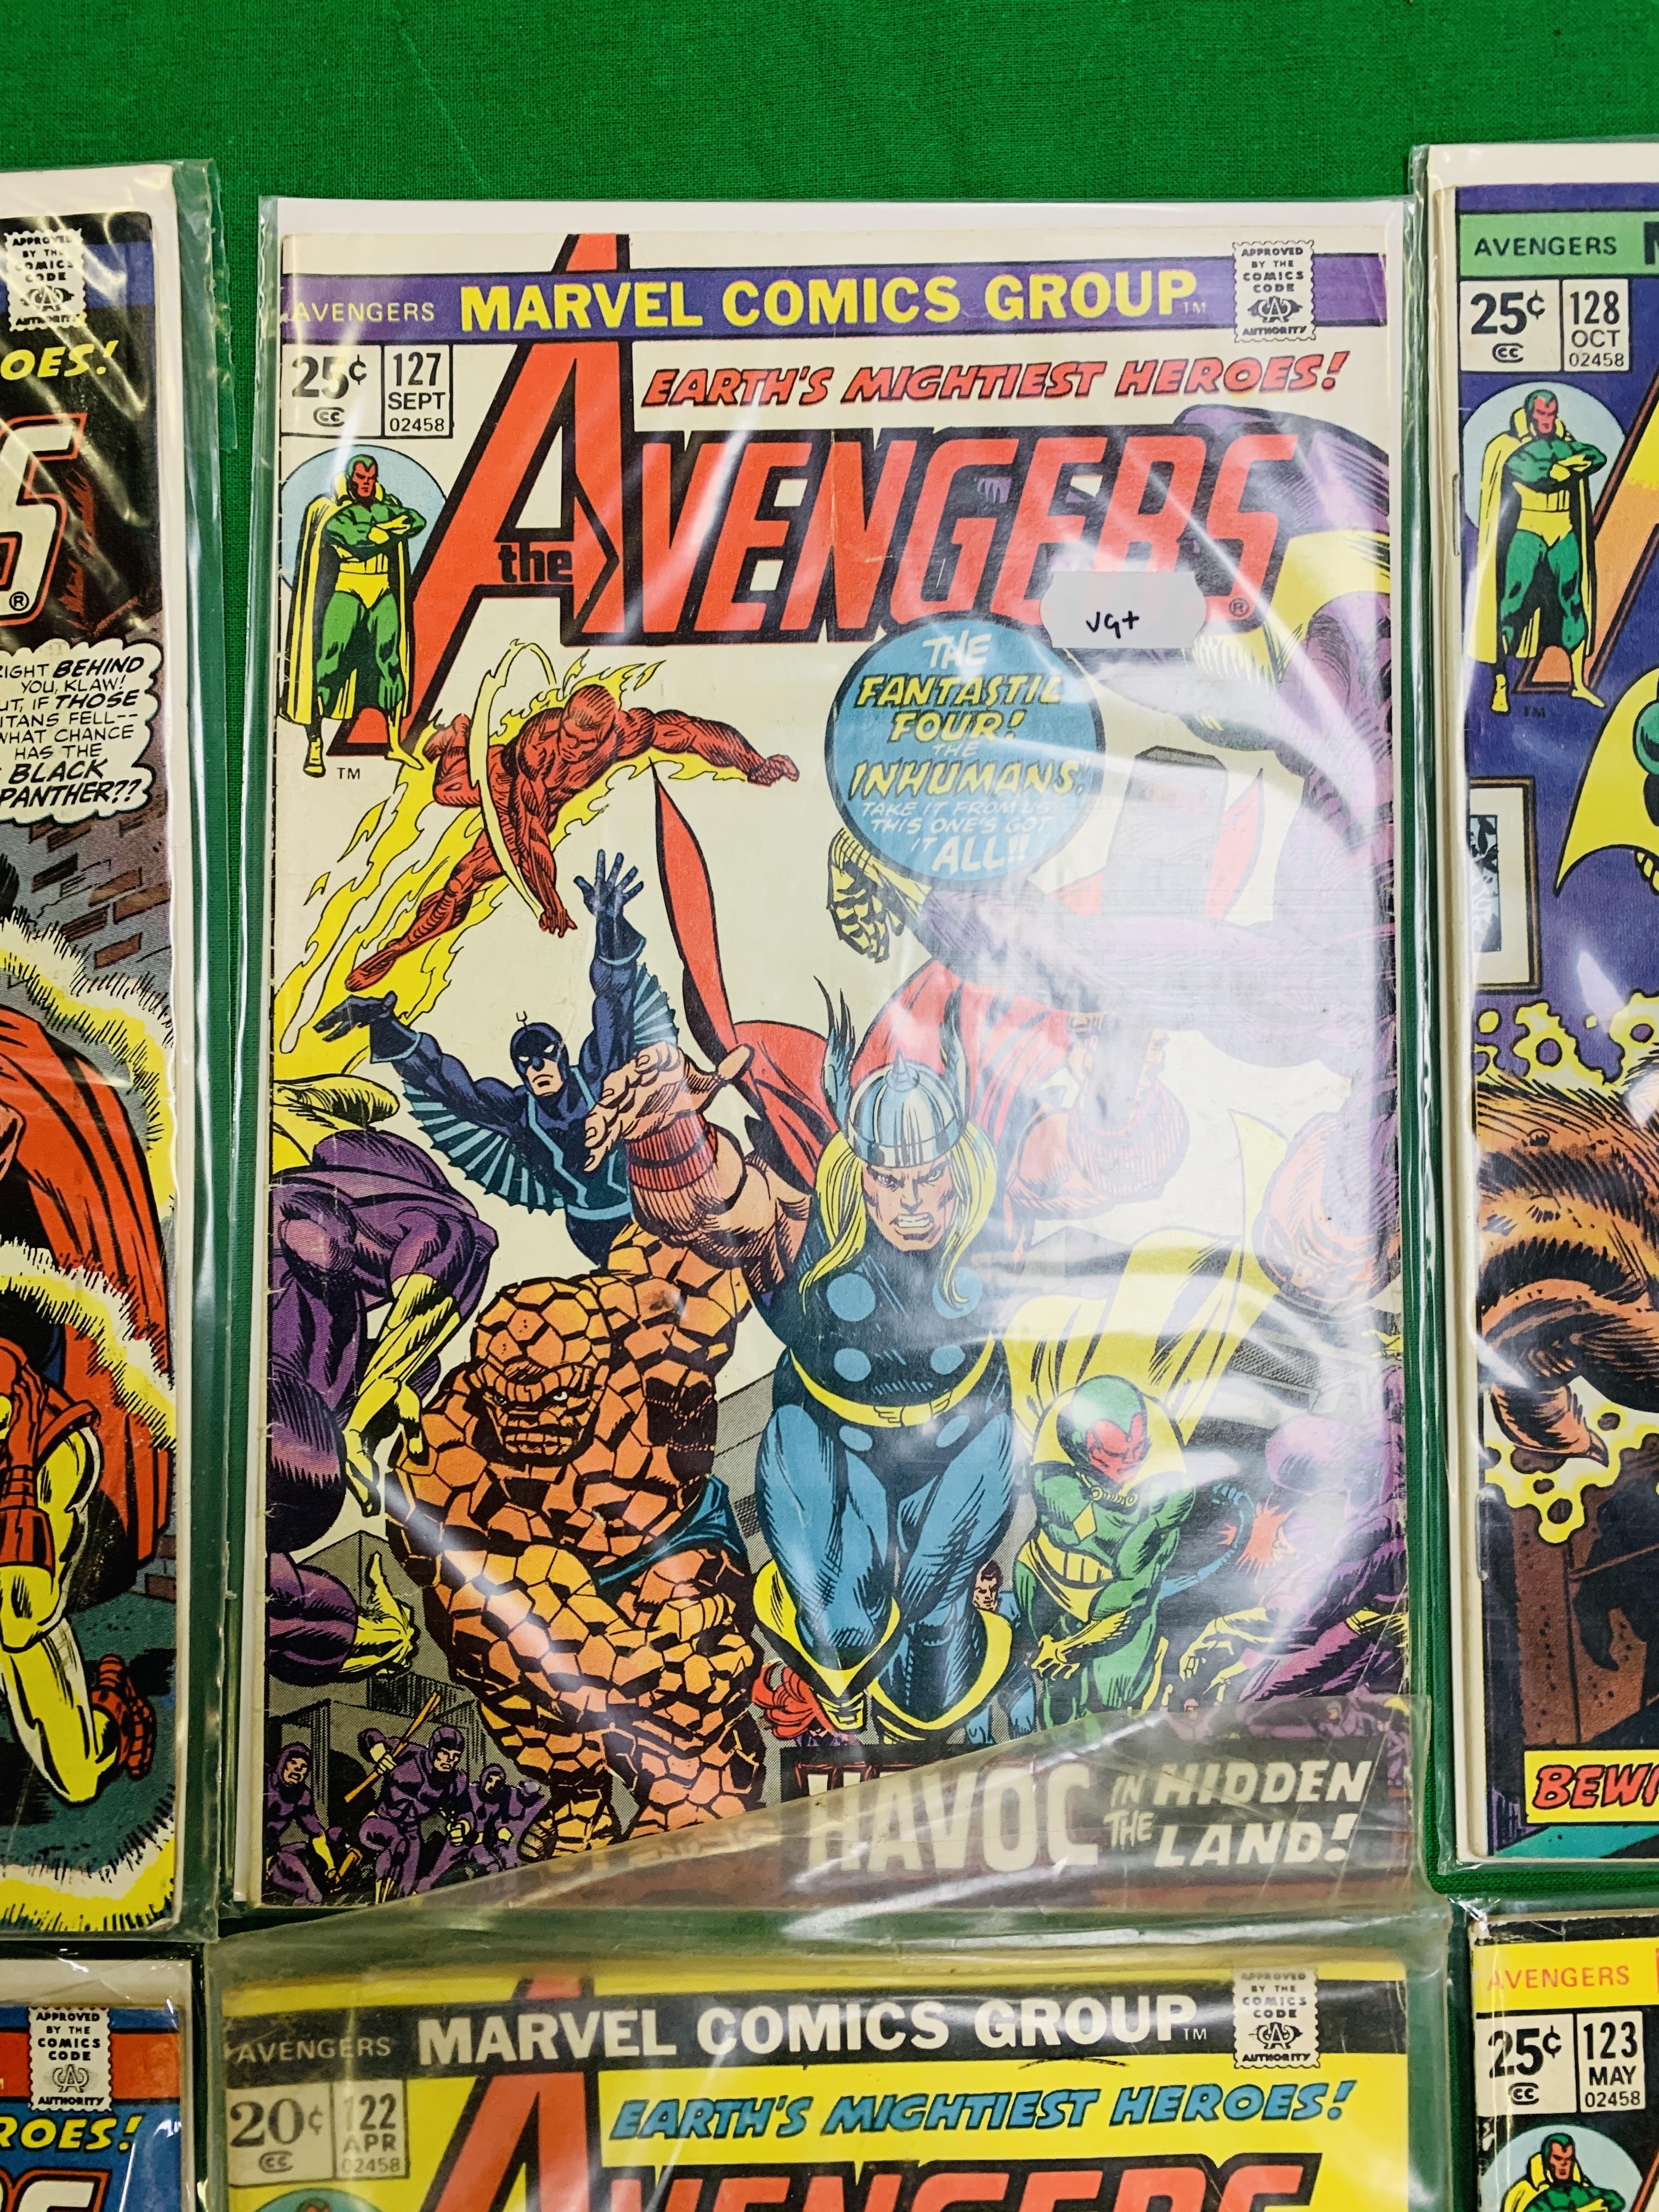 MARVEL COMICS THE AVENGERS NO. 101 - 299, MISSING ISSUES 103 AND 110. - Image 16 of 130